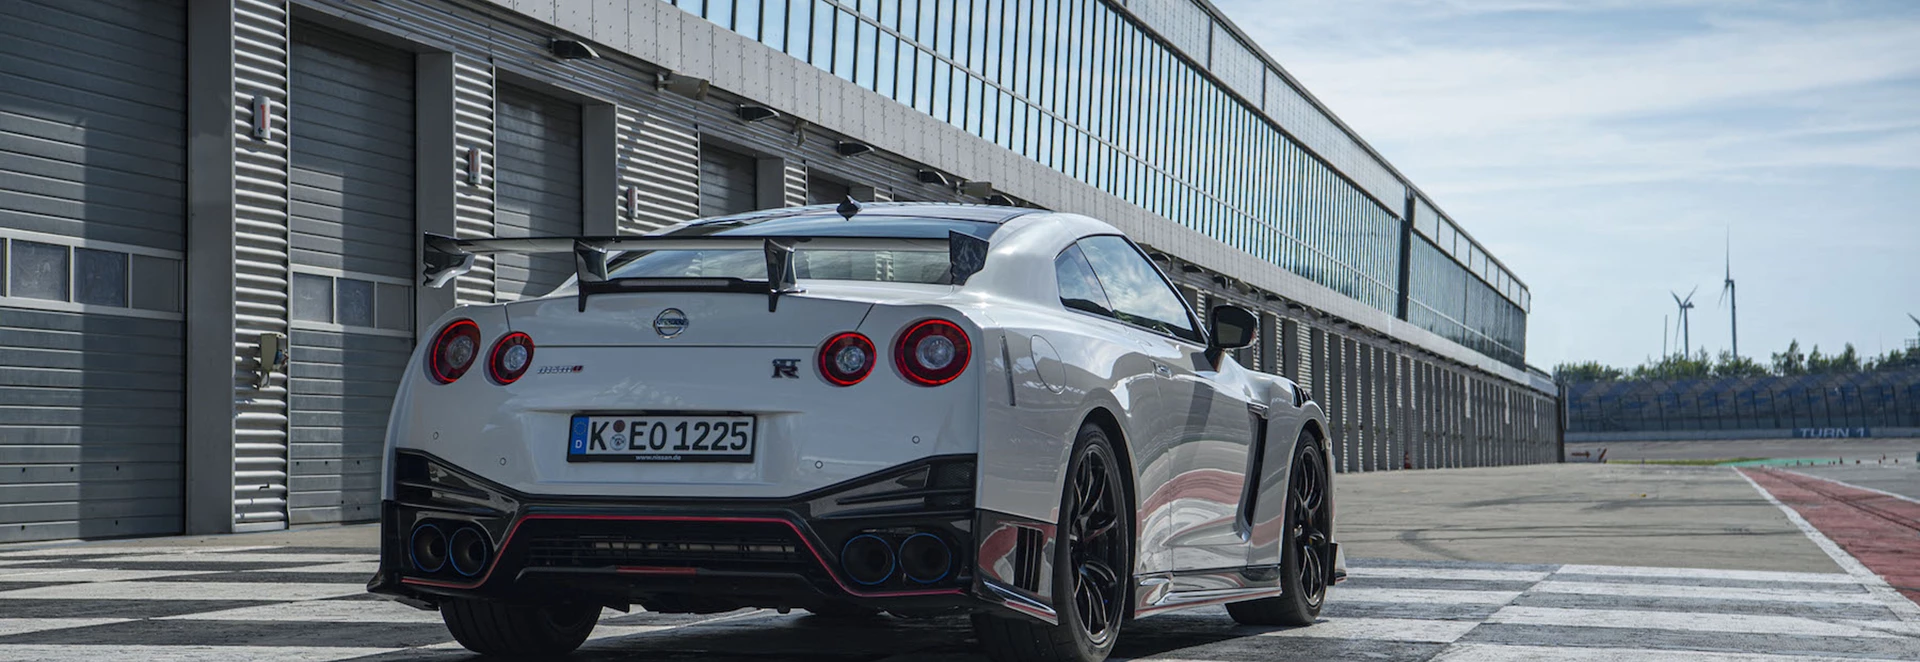 Prices revealed for 2020 Nissan GT-R Nismo